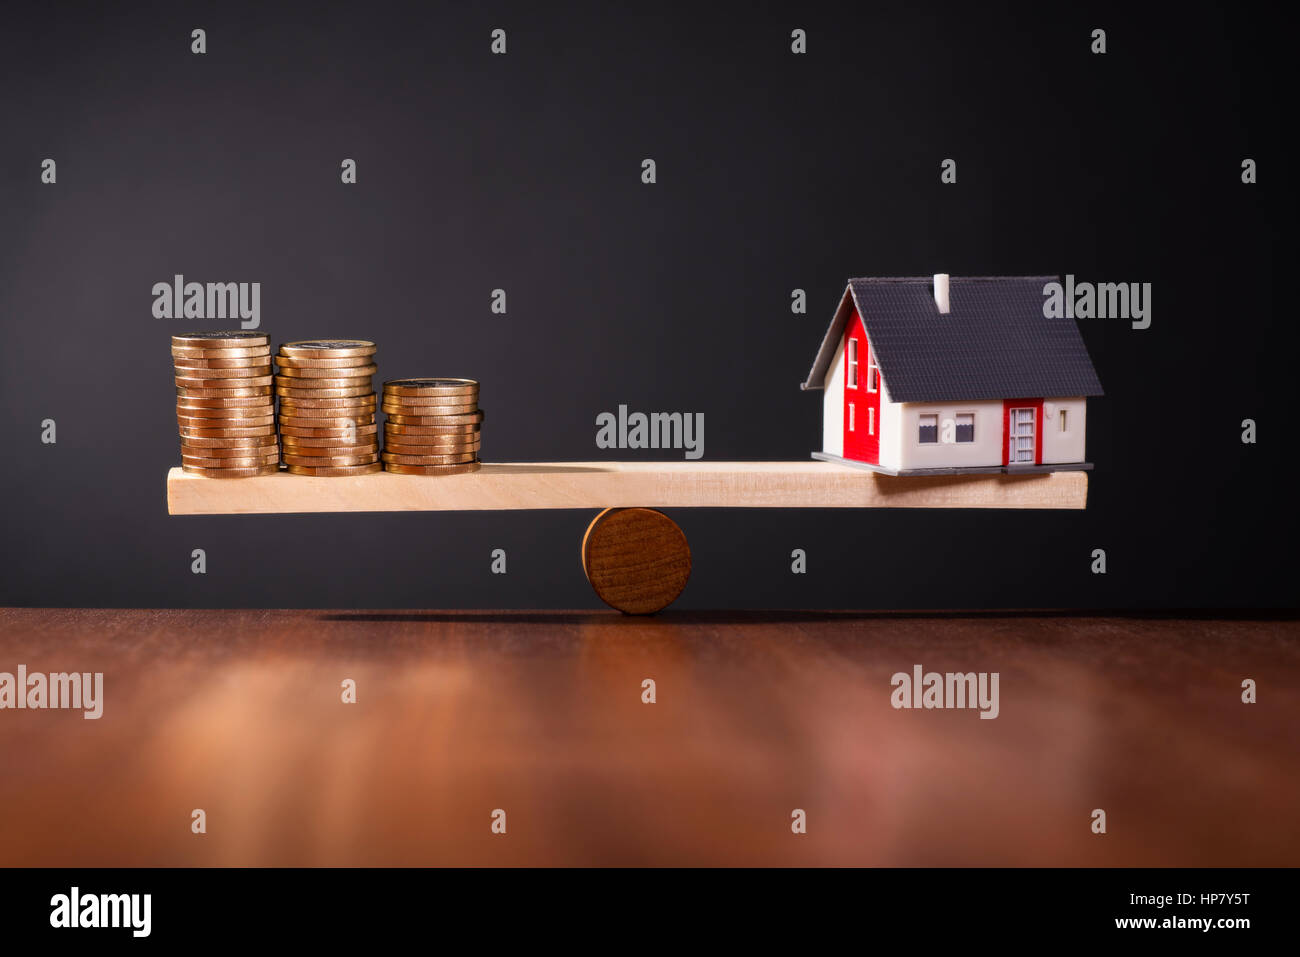 Seesaw with a house on one side and stacks of coins on the other side. Stock Photo